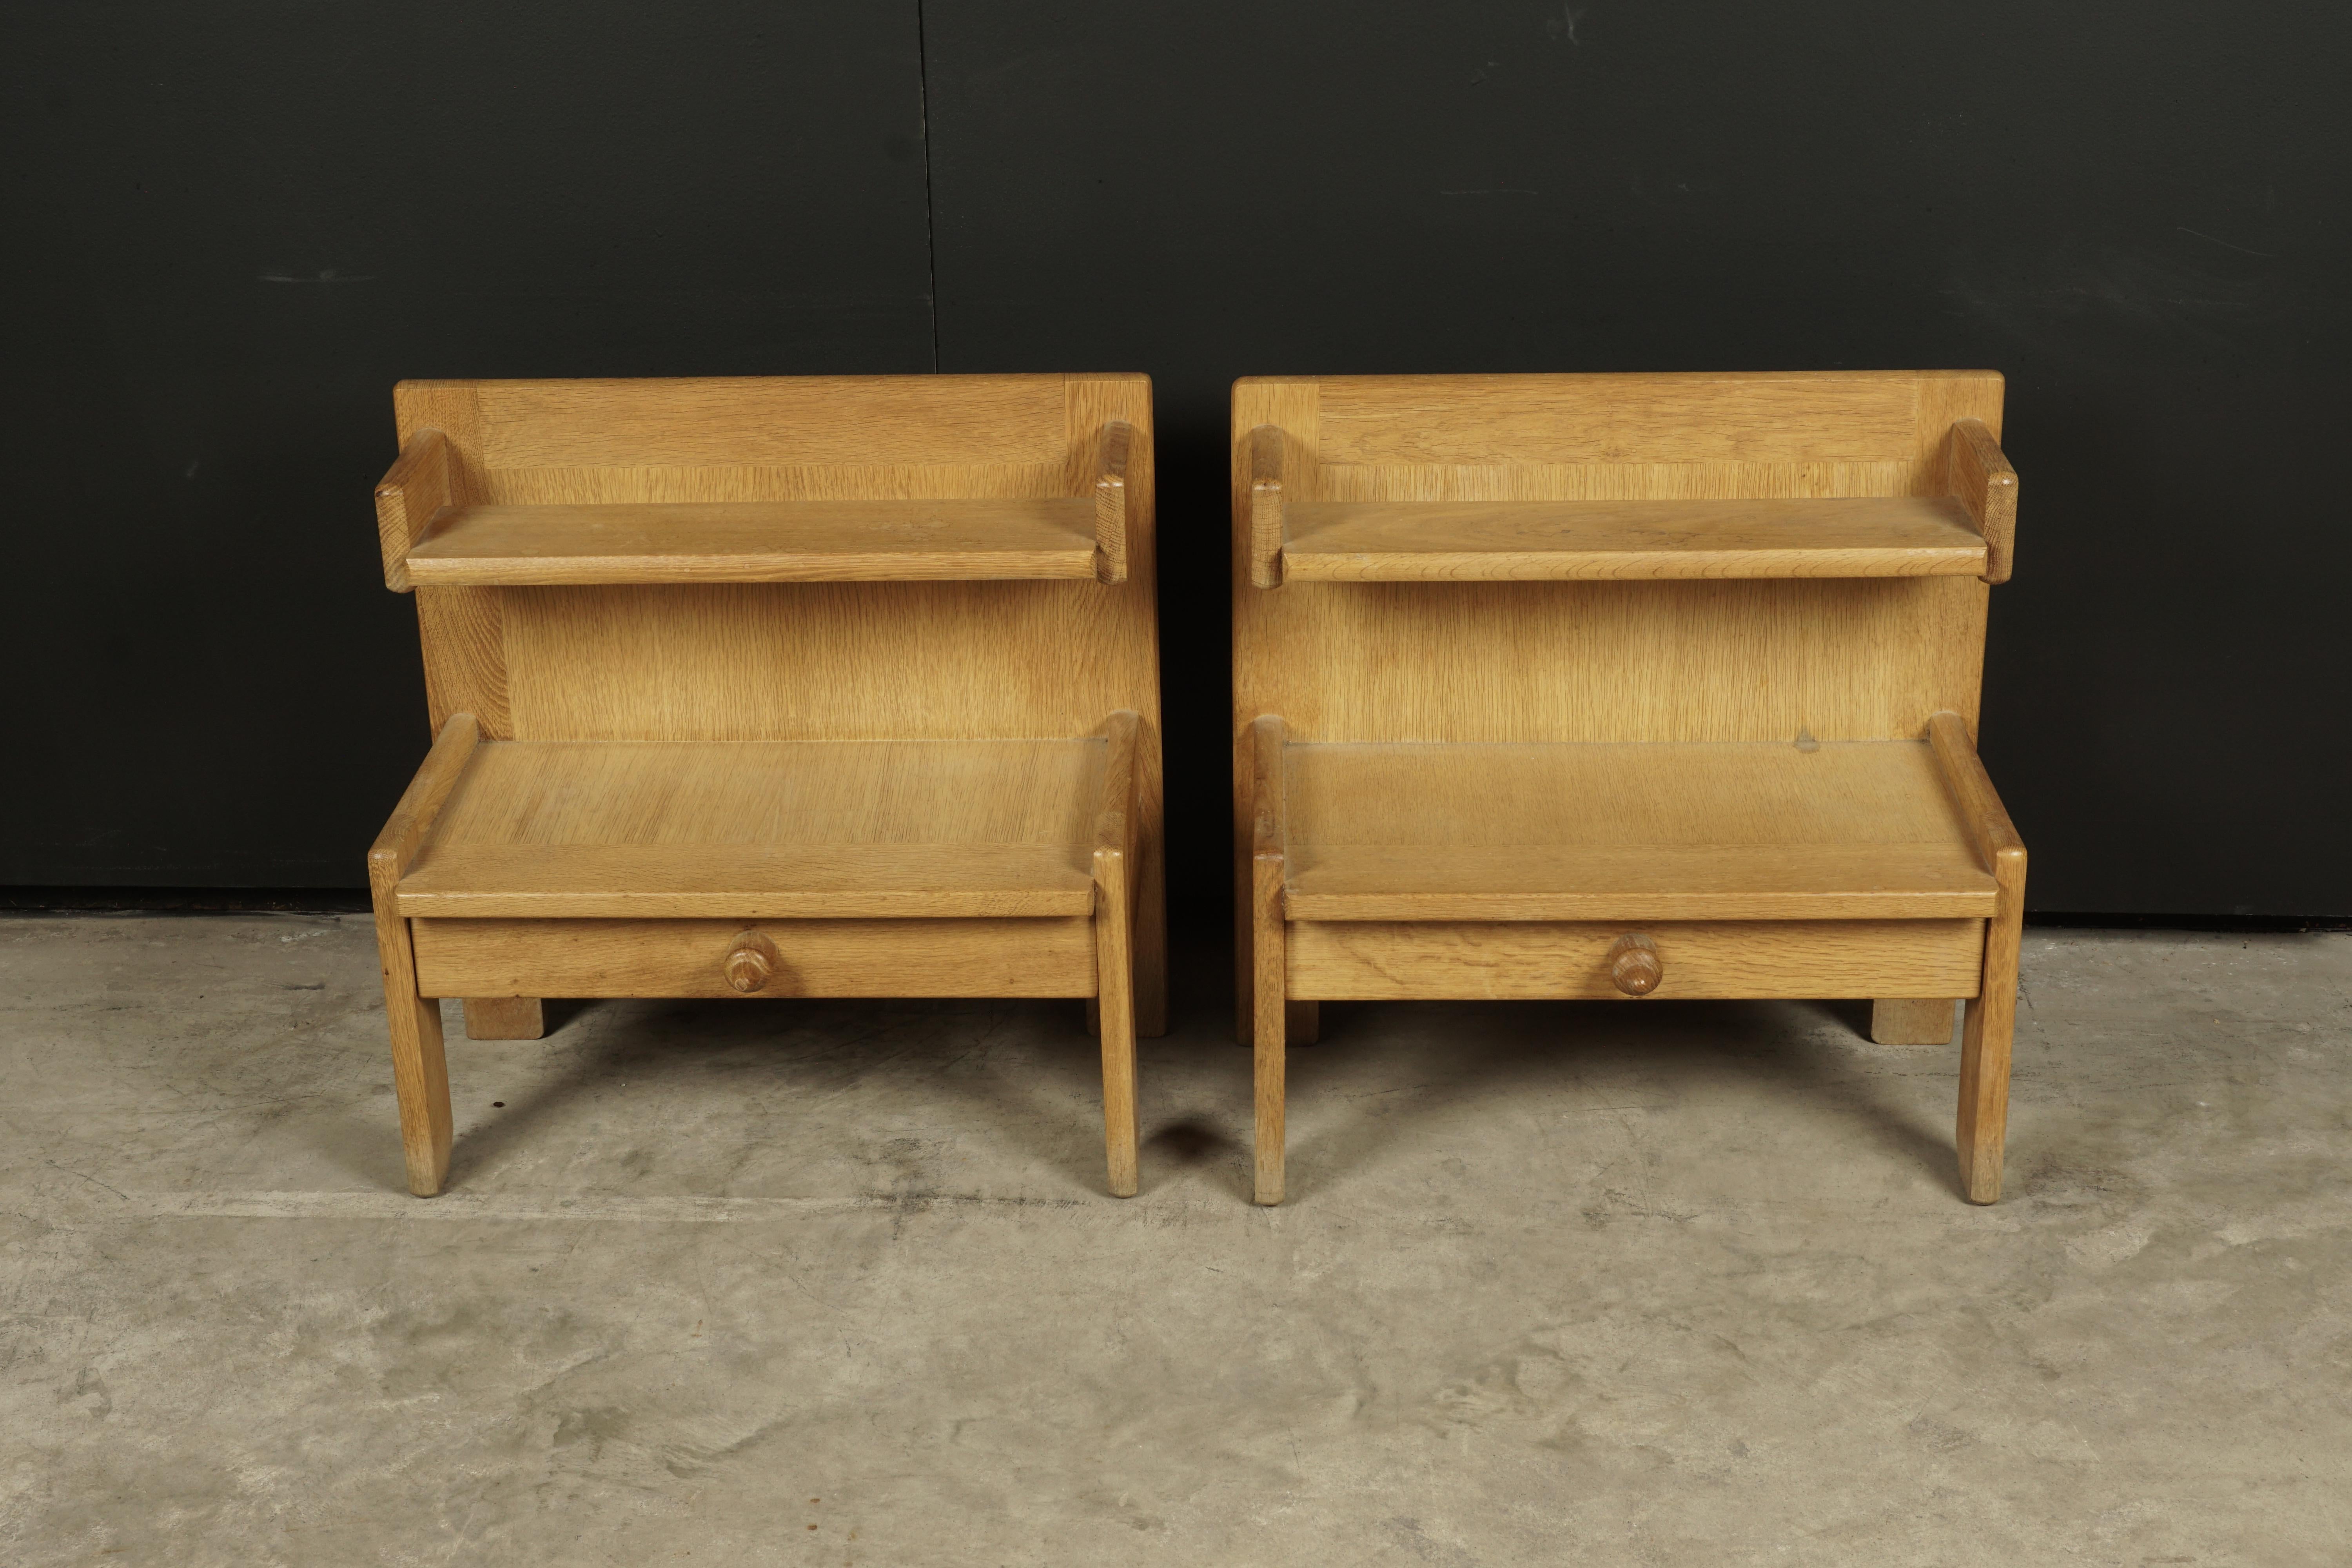 Vintage pair of Guillerme et Chambron, nightstands in oak, France, 1960s. Solid oak construction with one-drawer. Light wear and patina.